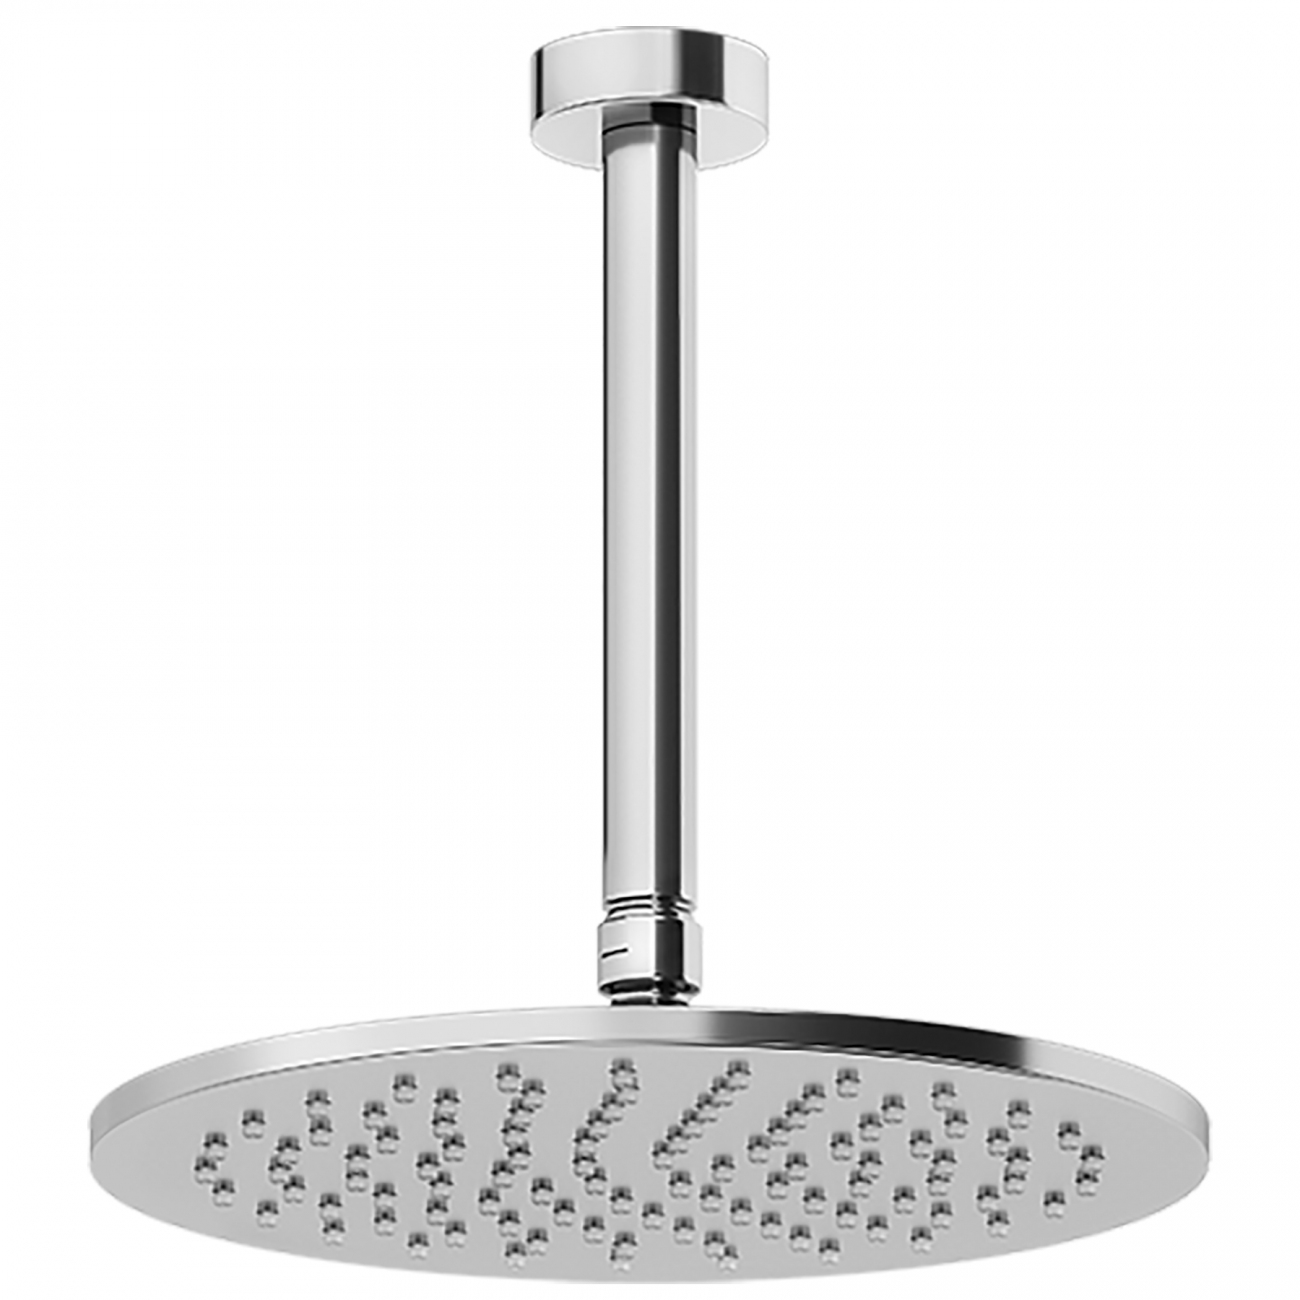 Gessi Anello ceiling-mounted showerhead